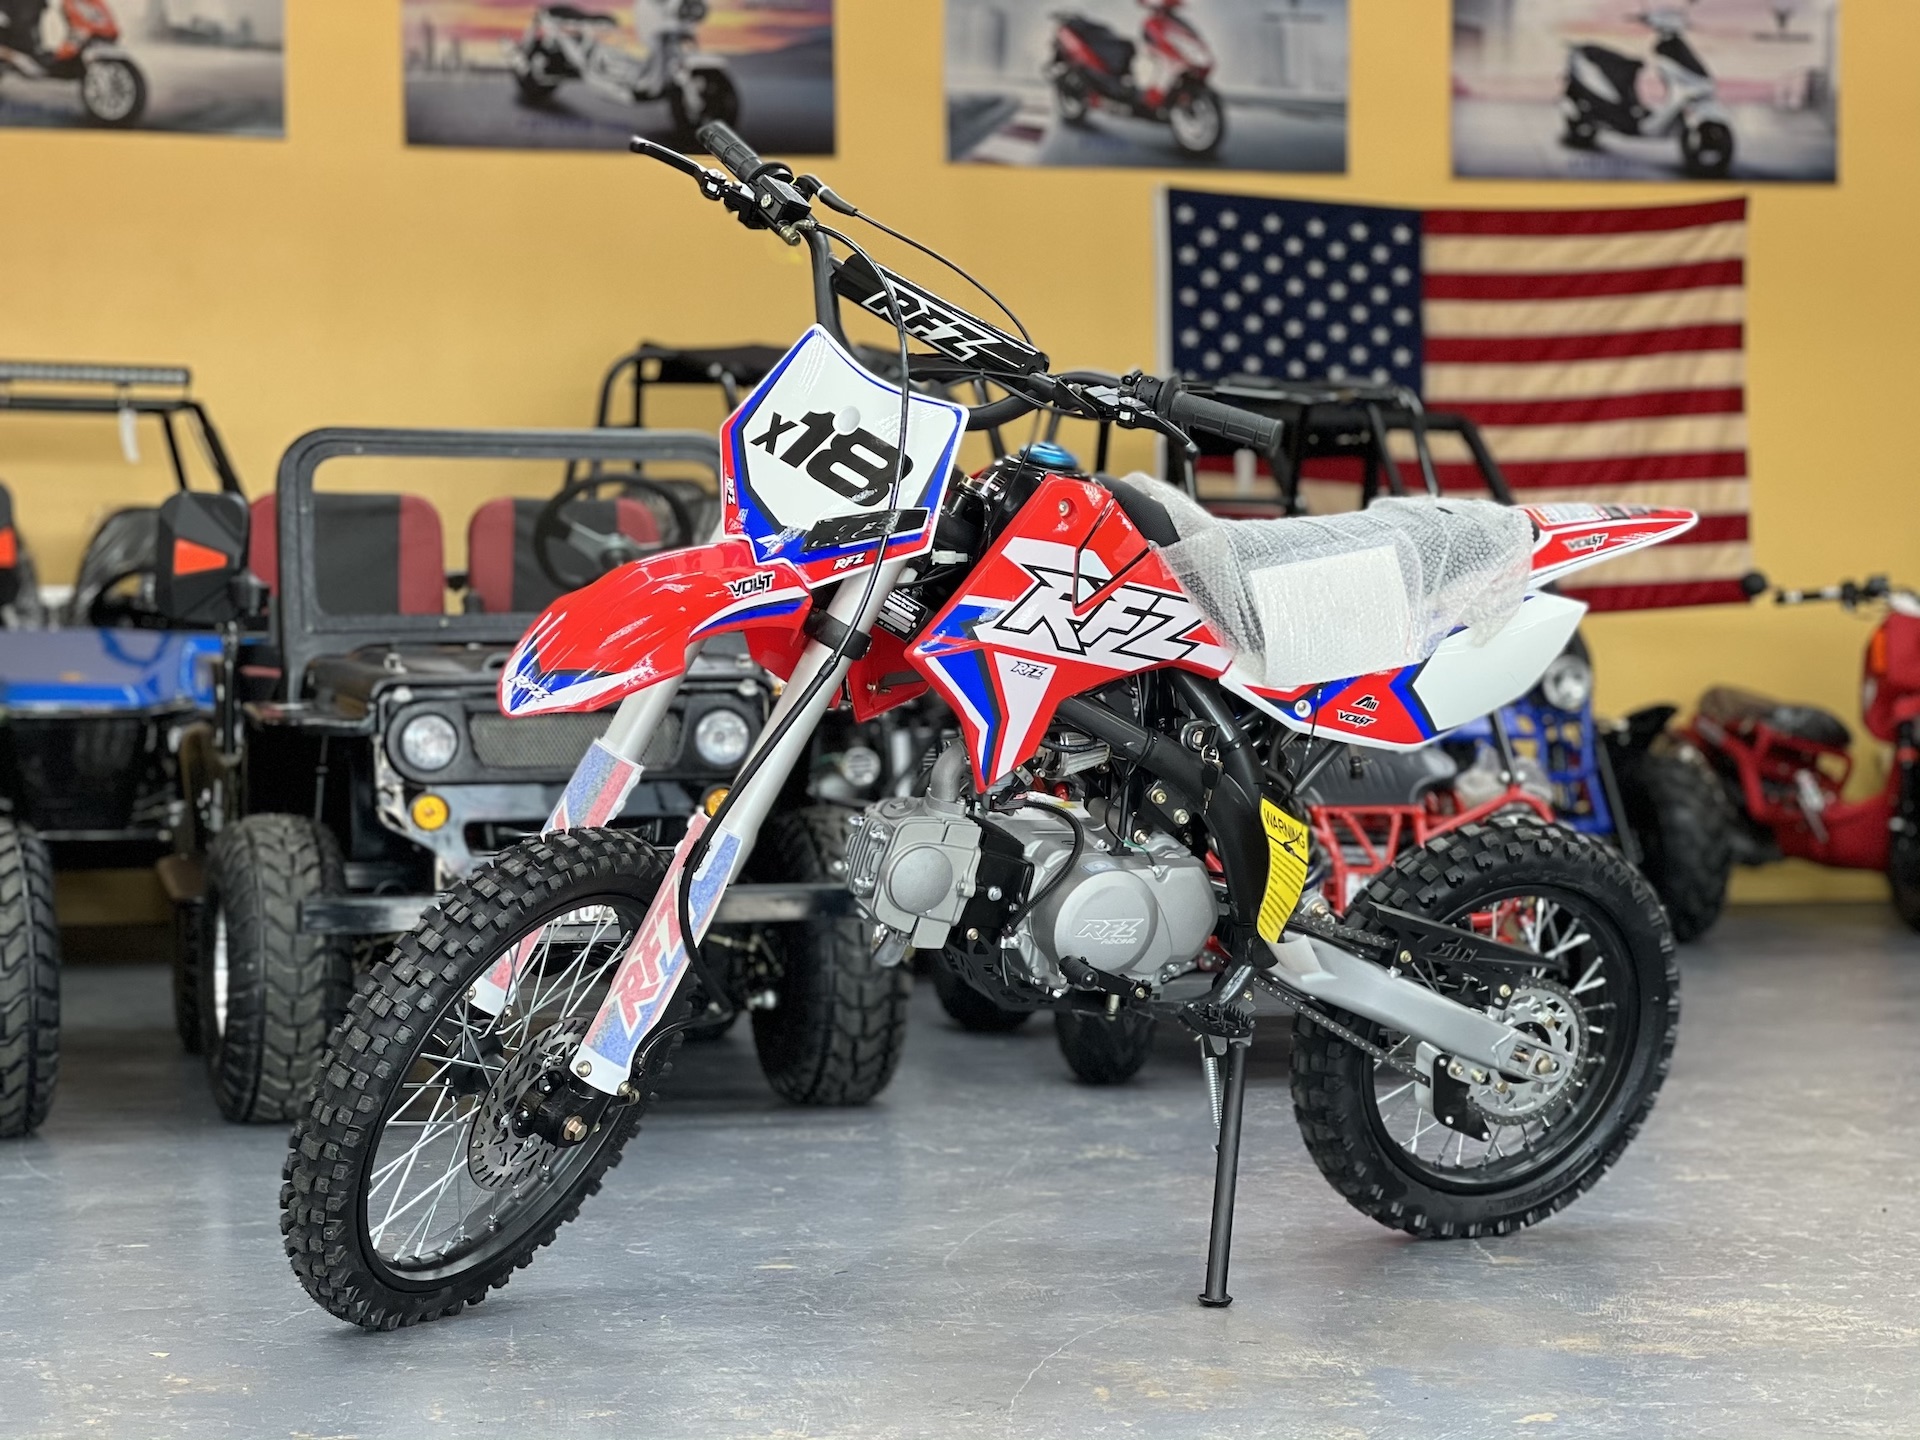 A red and white dirt bike parked in front of an american flag.